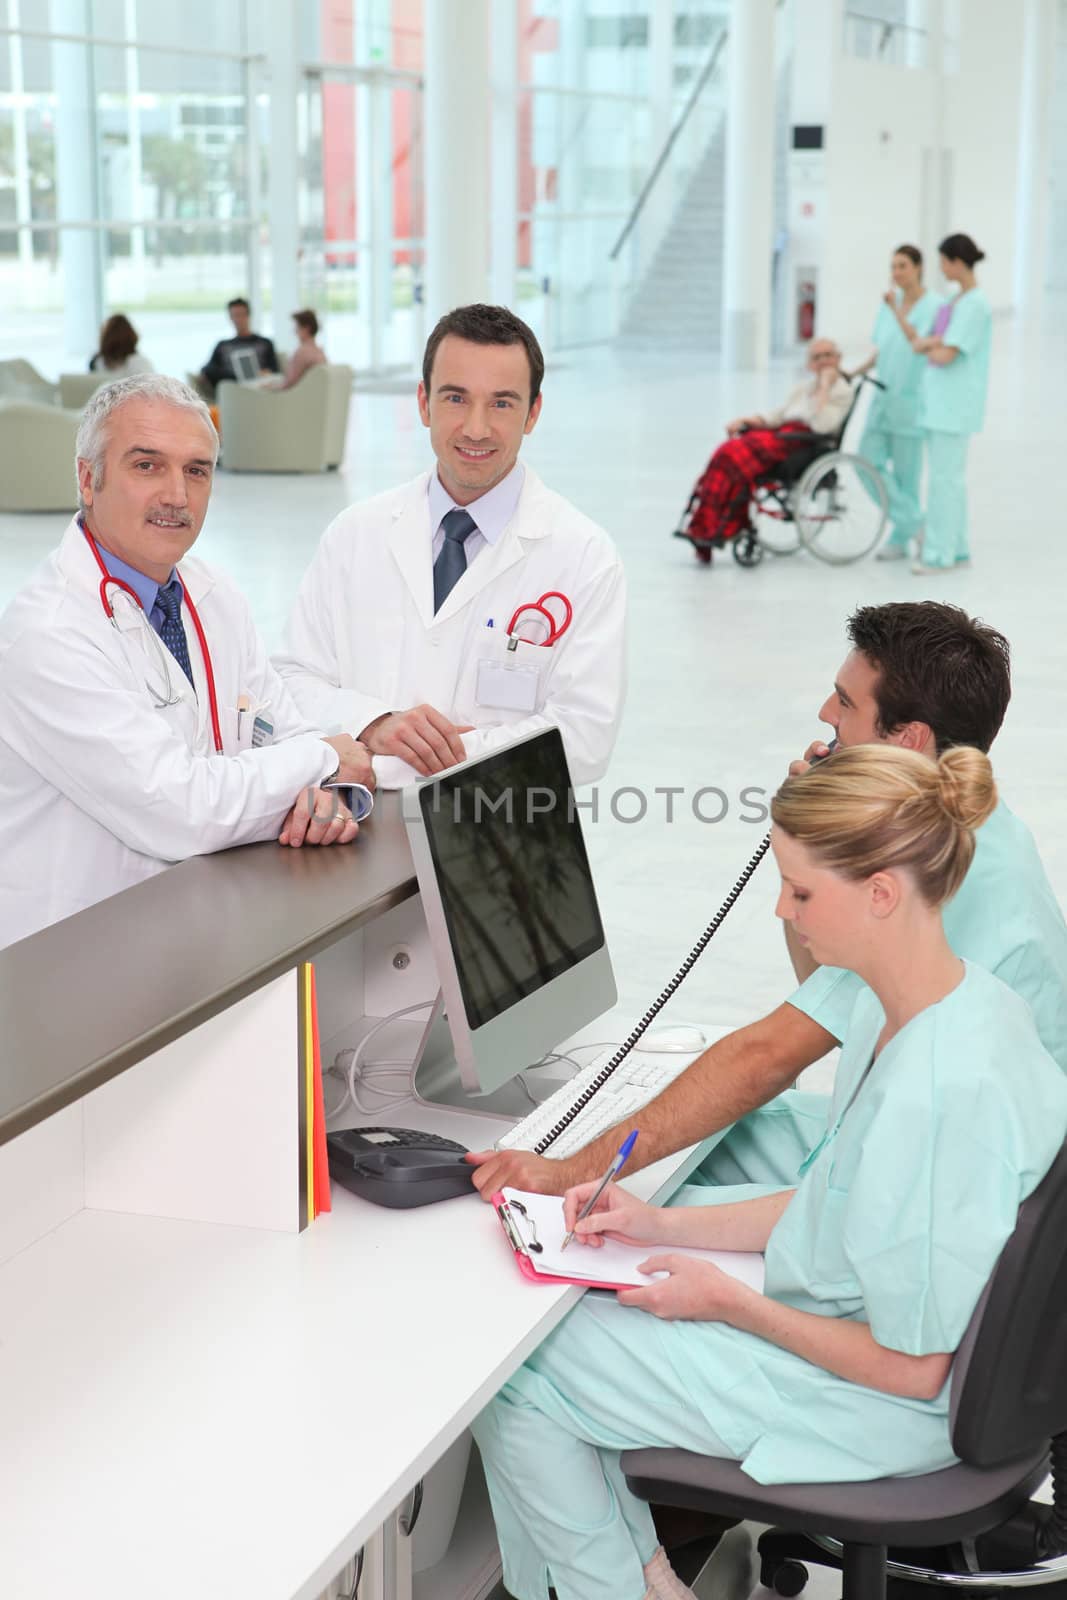 Staff at hospital reception by phovoir